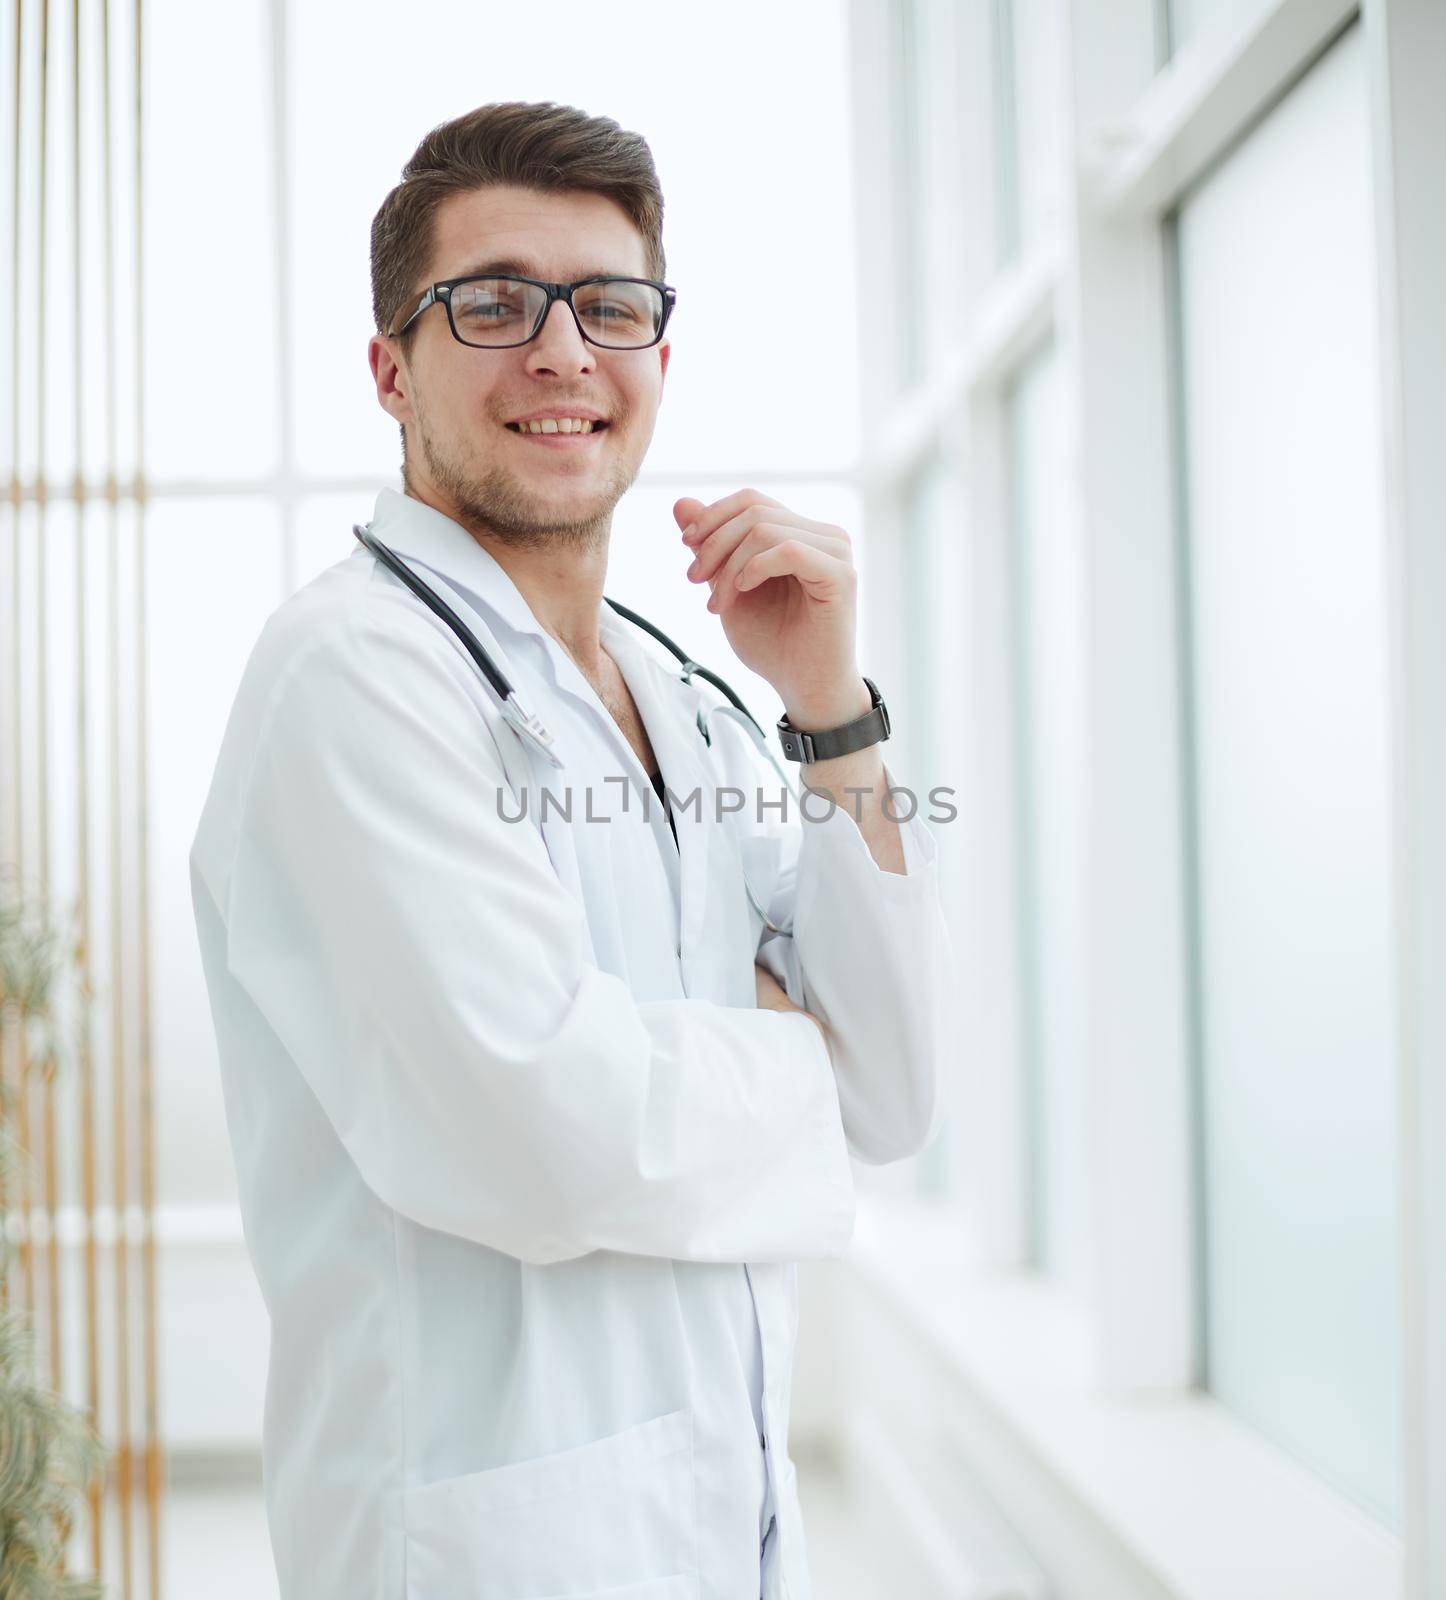 Portrait of young, doctor sitting in medical office